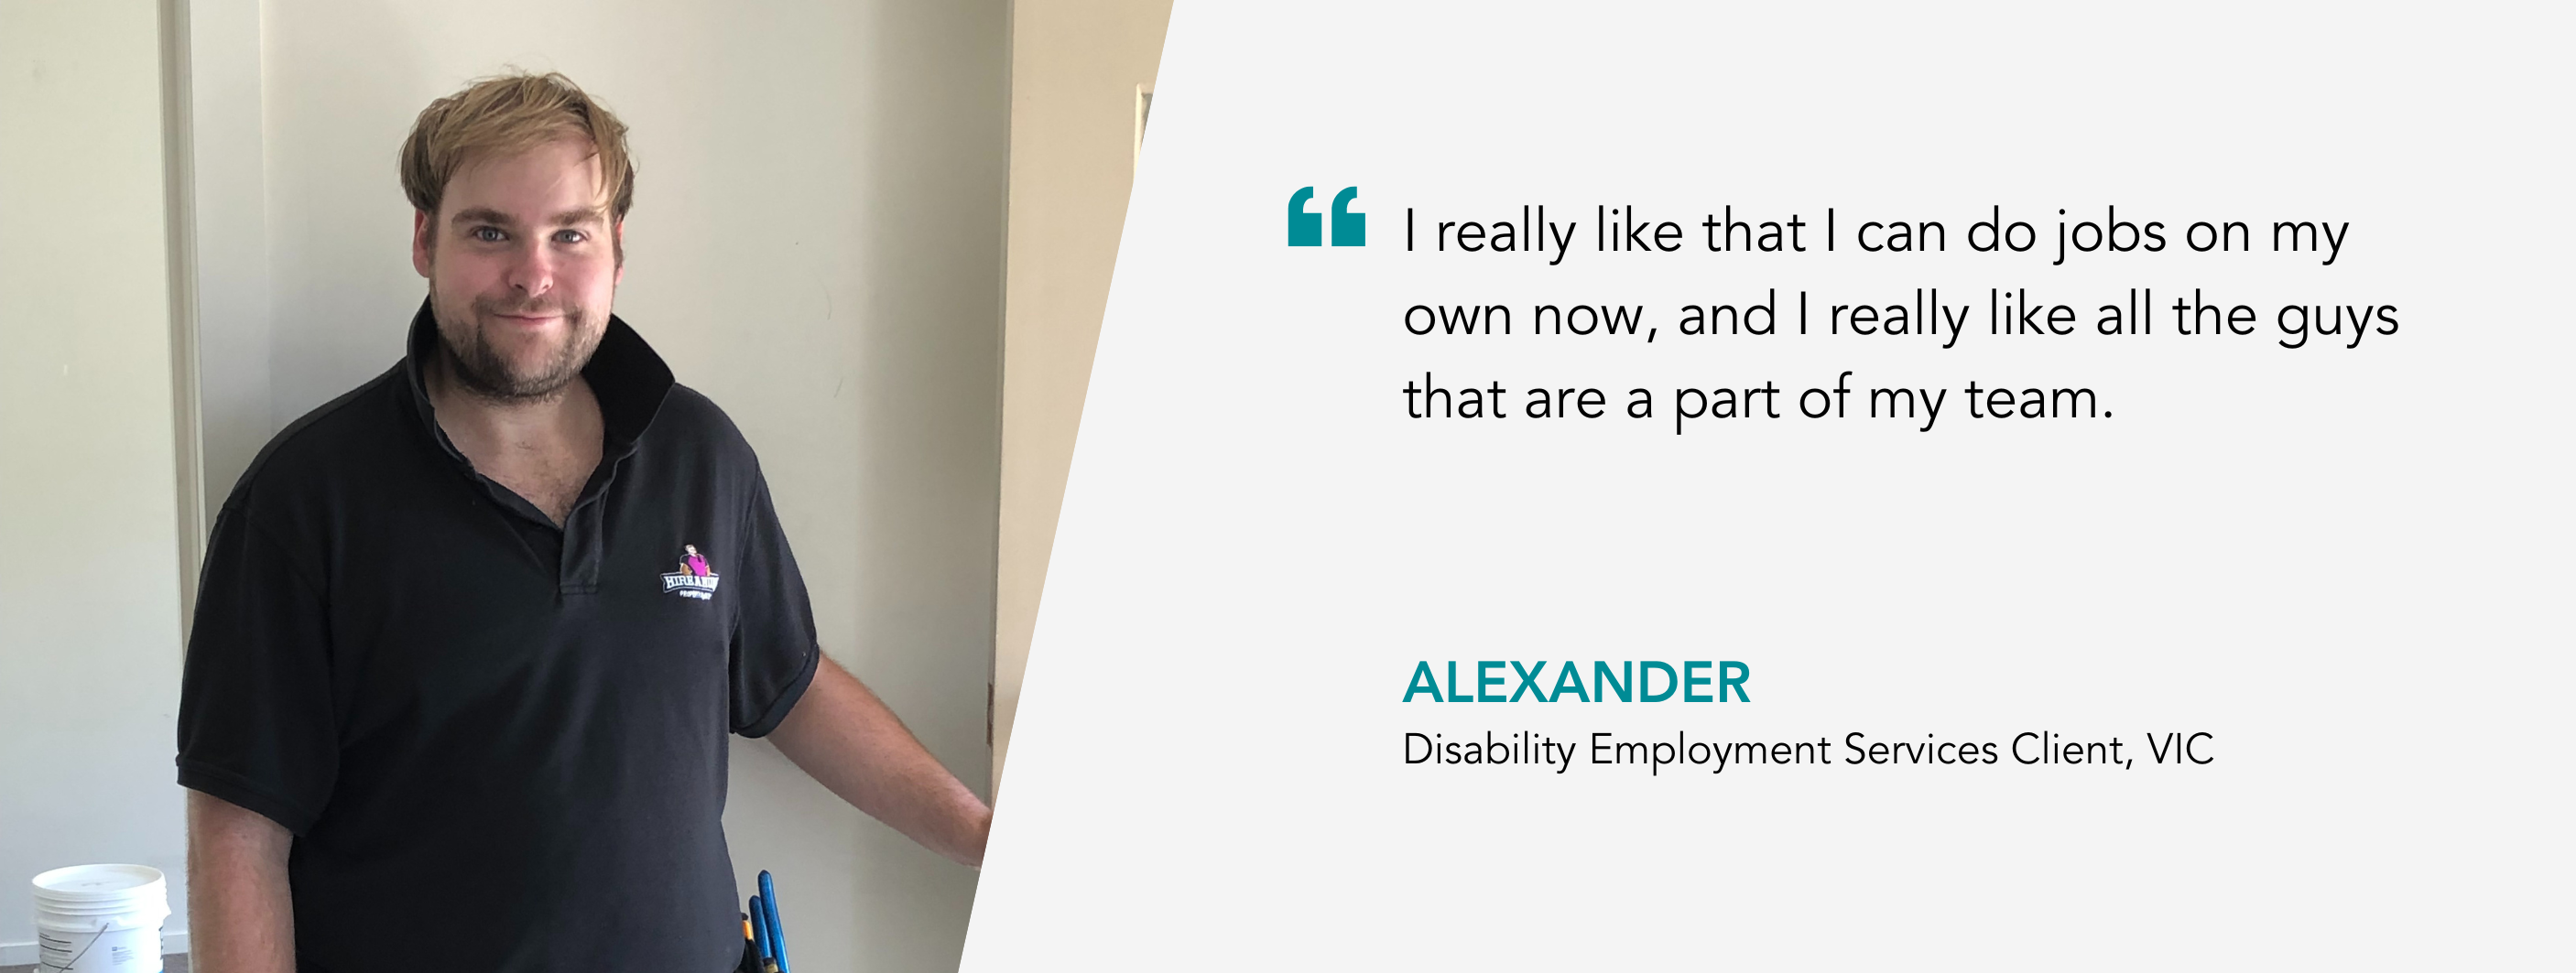 I really like that I can do jobs on my own now, and I really like all the guys that are a part of my team - Alexander, Disability Employment Services Client, VIC.